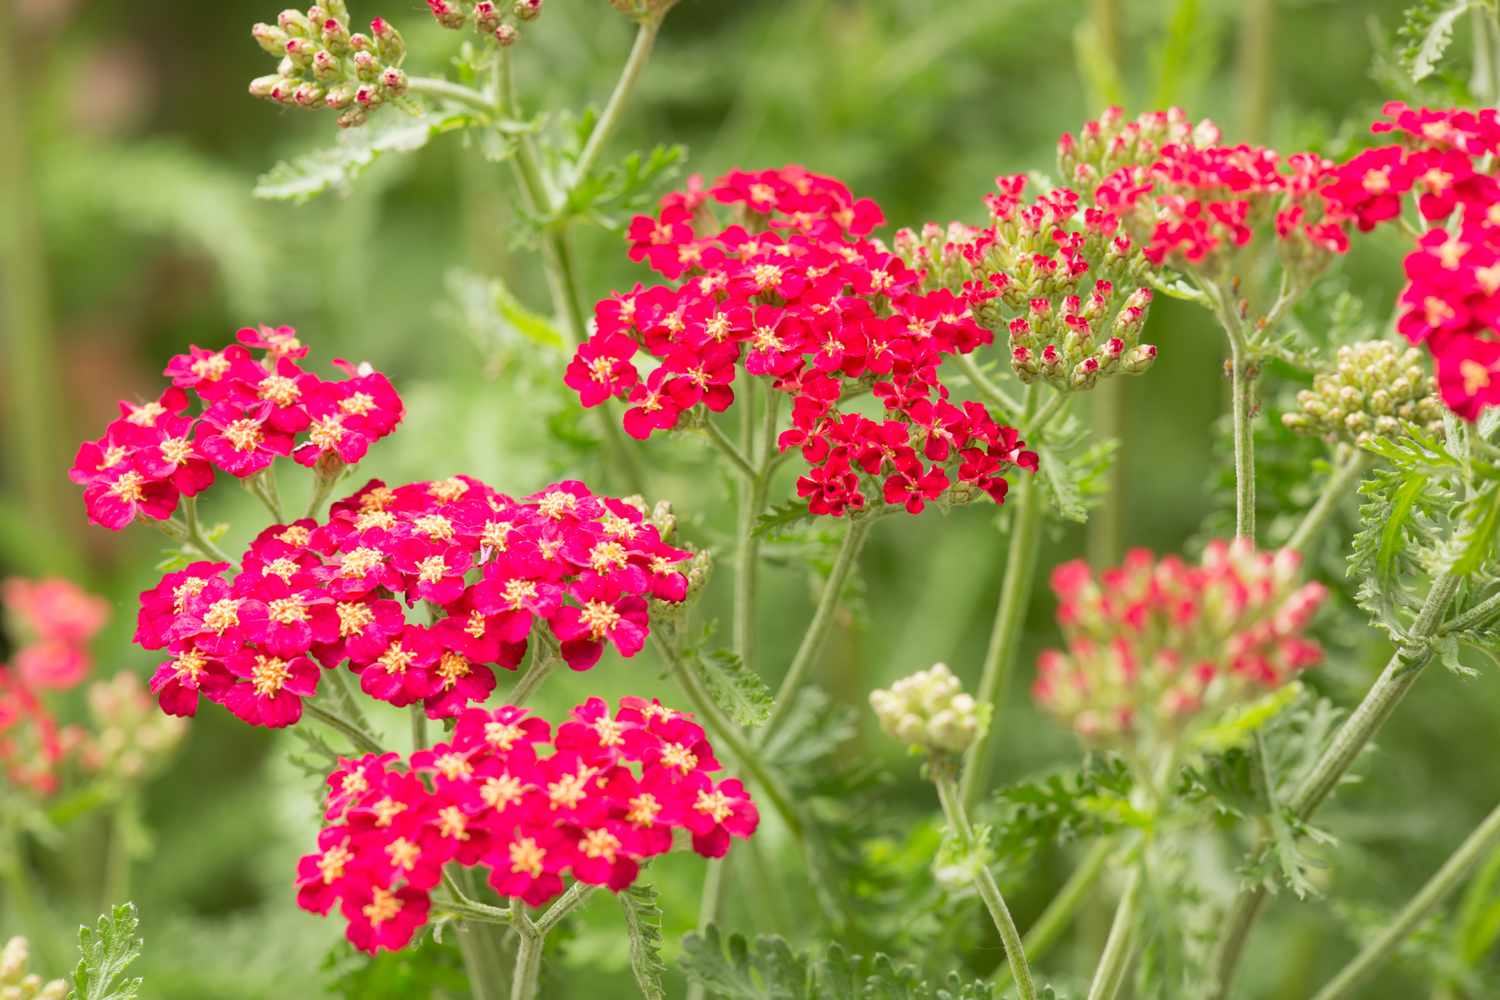 closeup of tiny red yarrow flowers with yellow centers against green stems and leaves